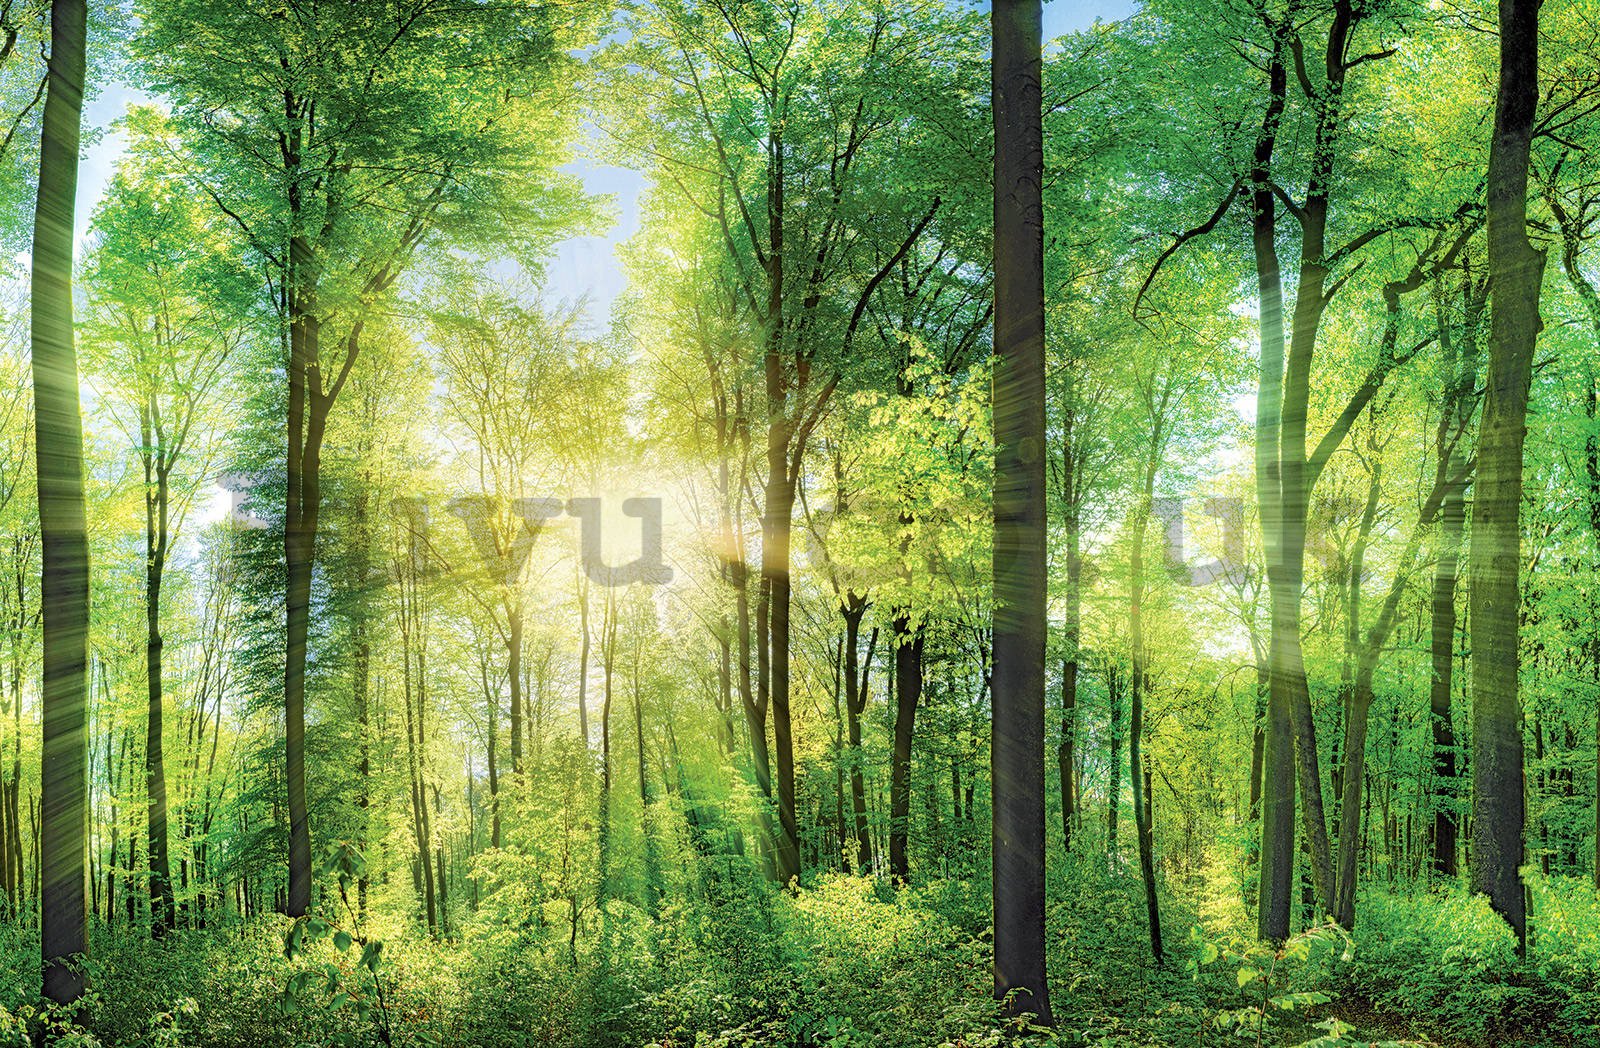 Painting on canvas: Green Forest (1) - 116x76 cm